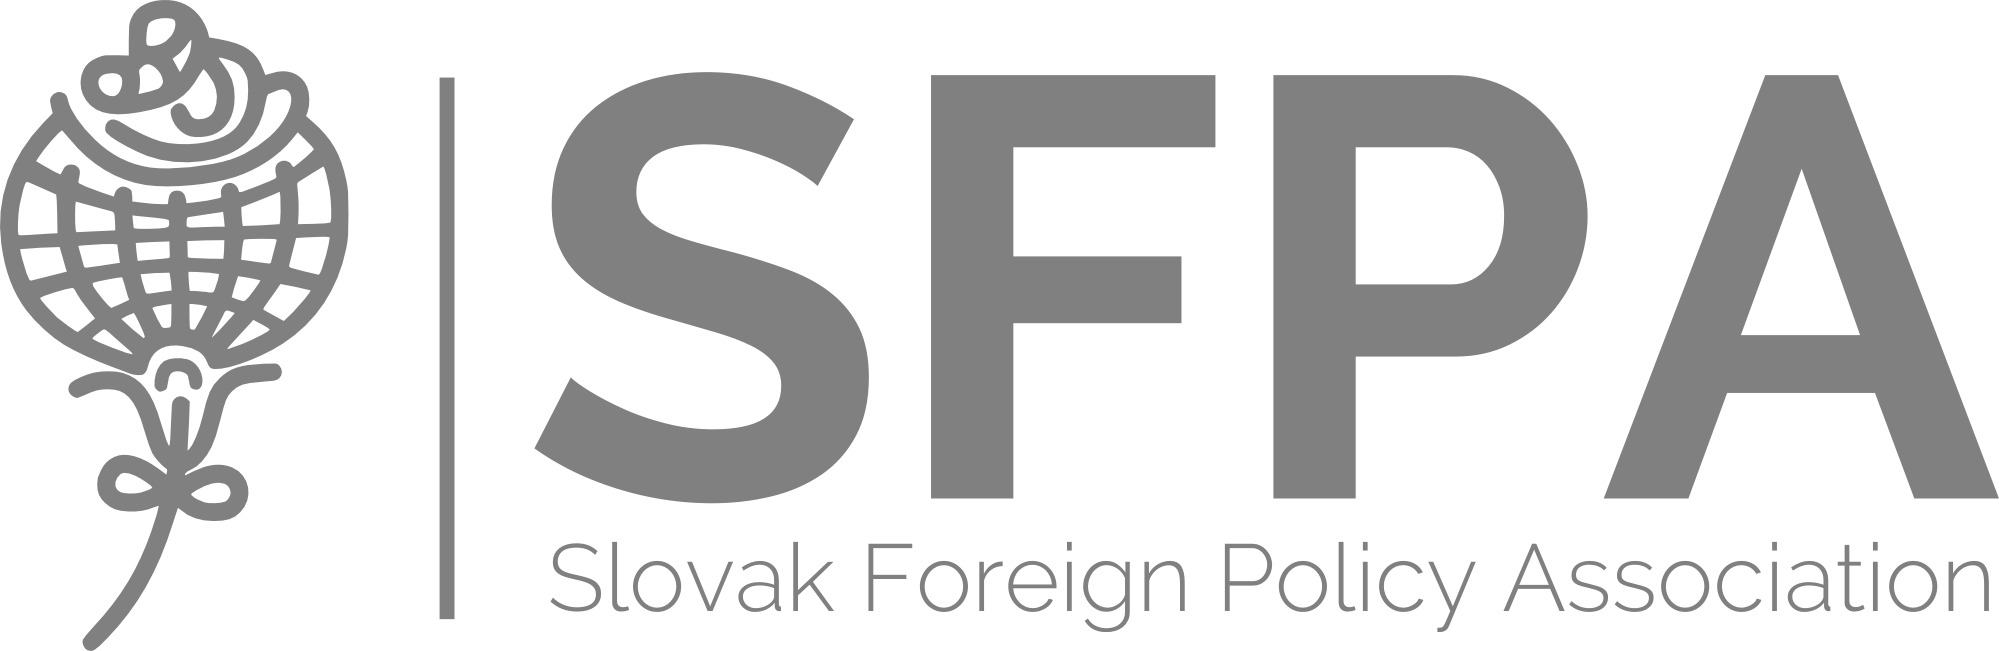 Slovak Foreign Policy Association